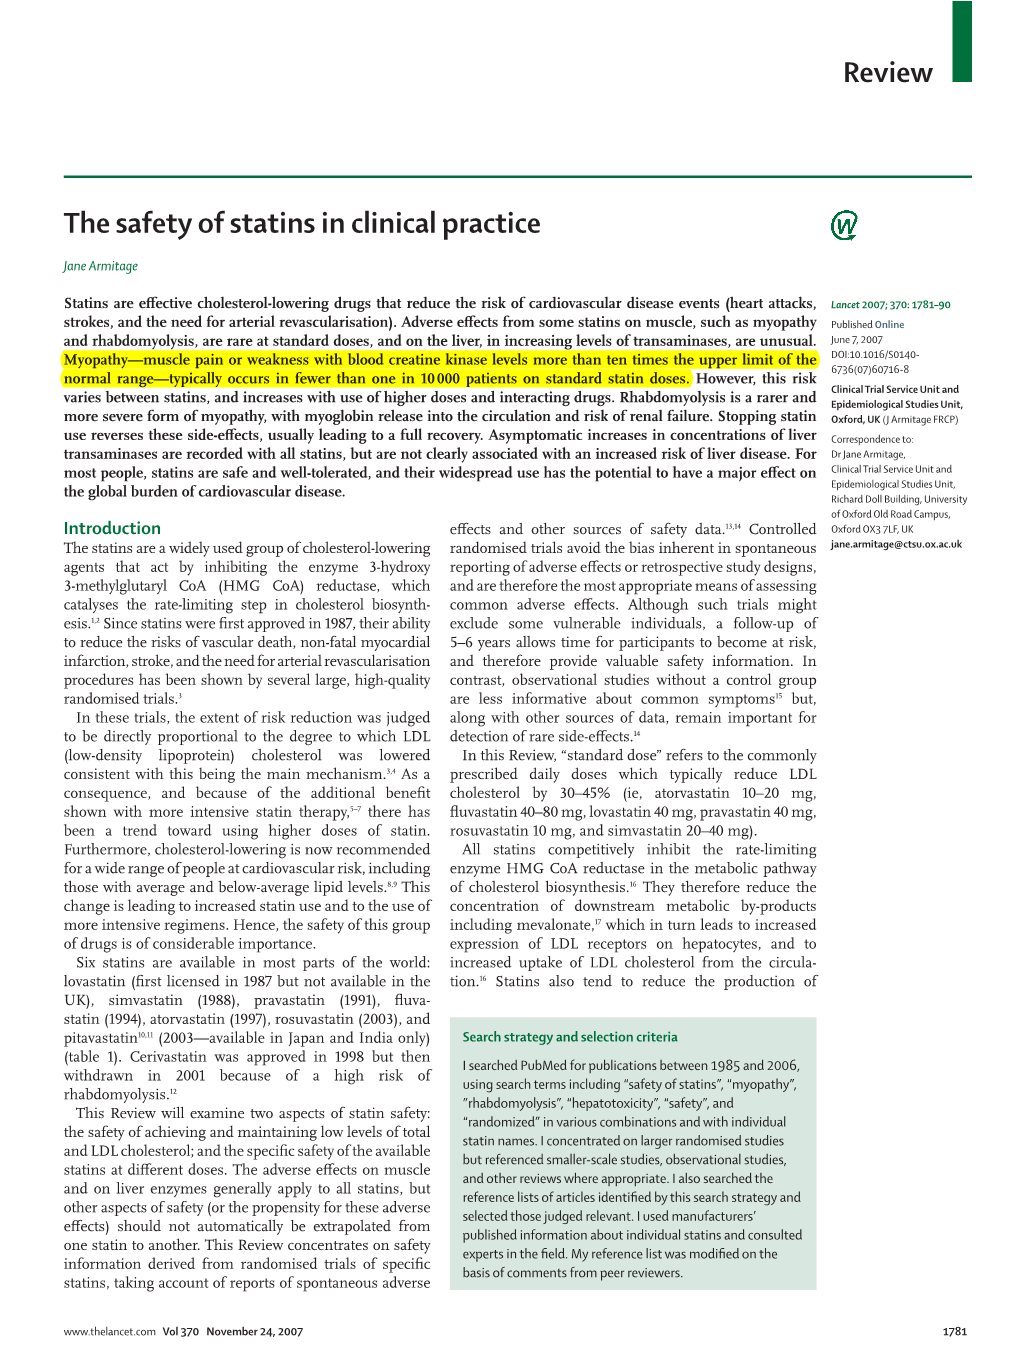 Review the Safety of Statins in Clinical Practice